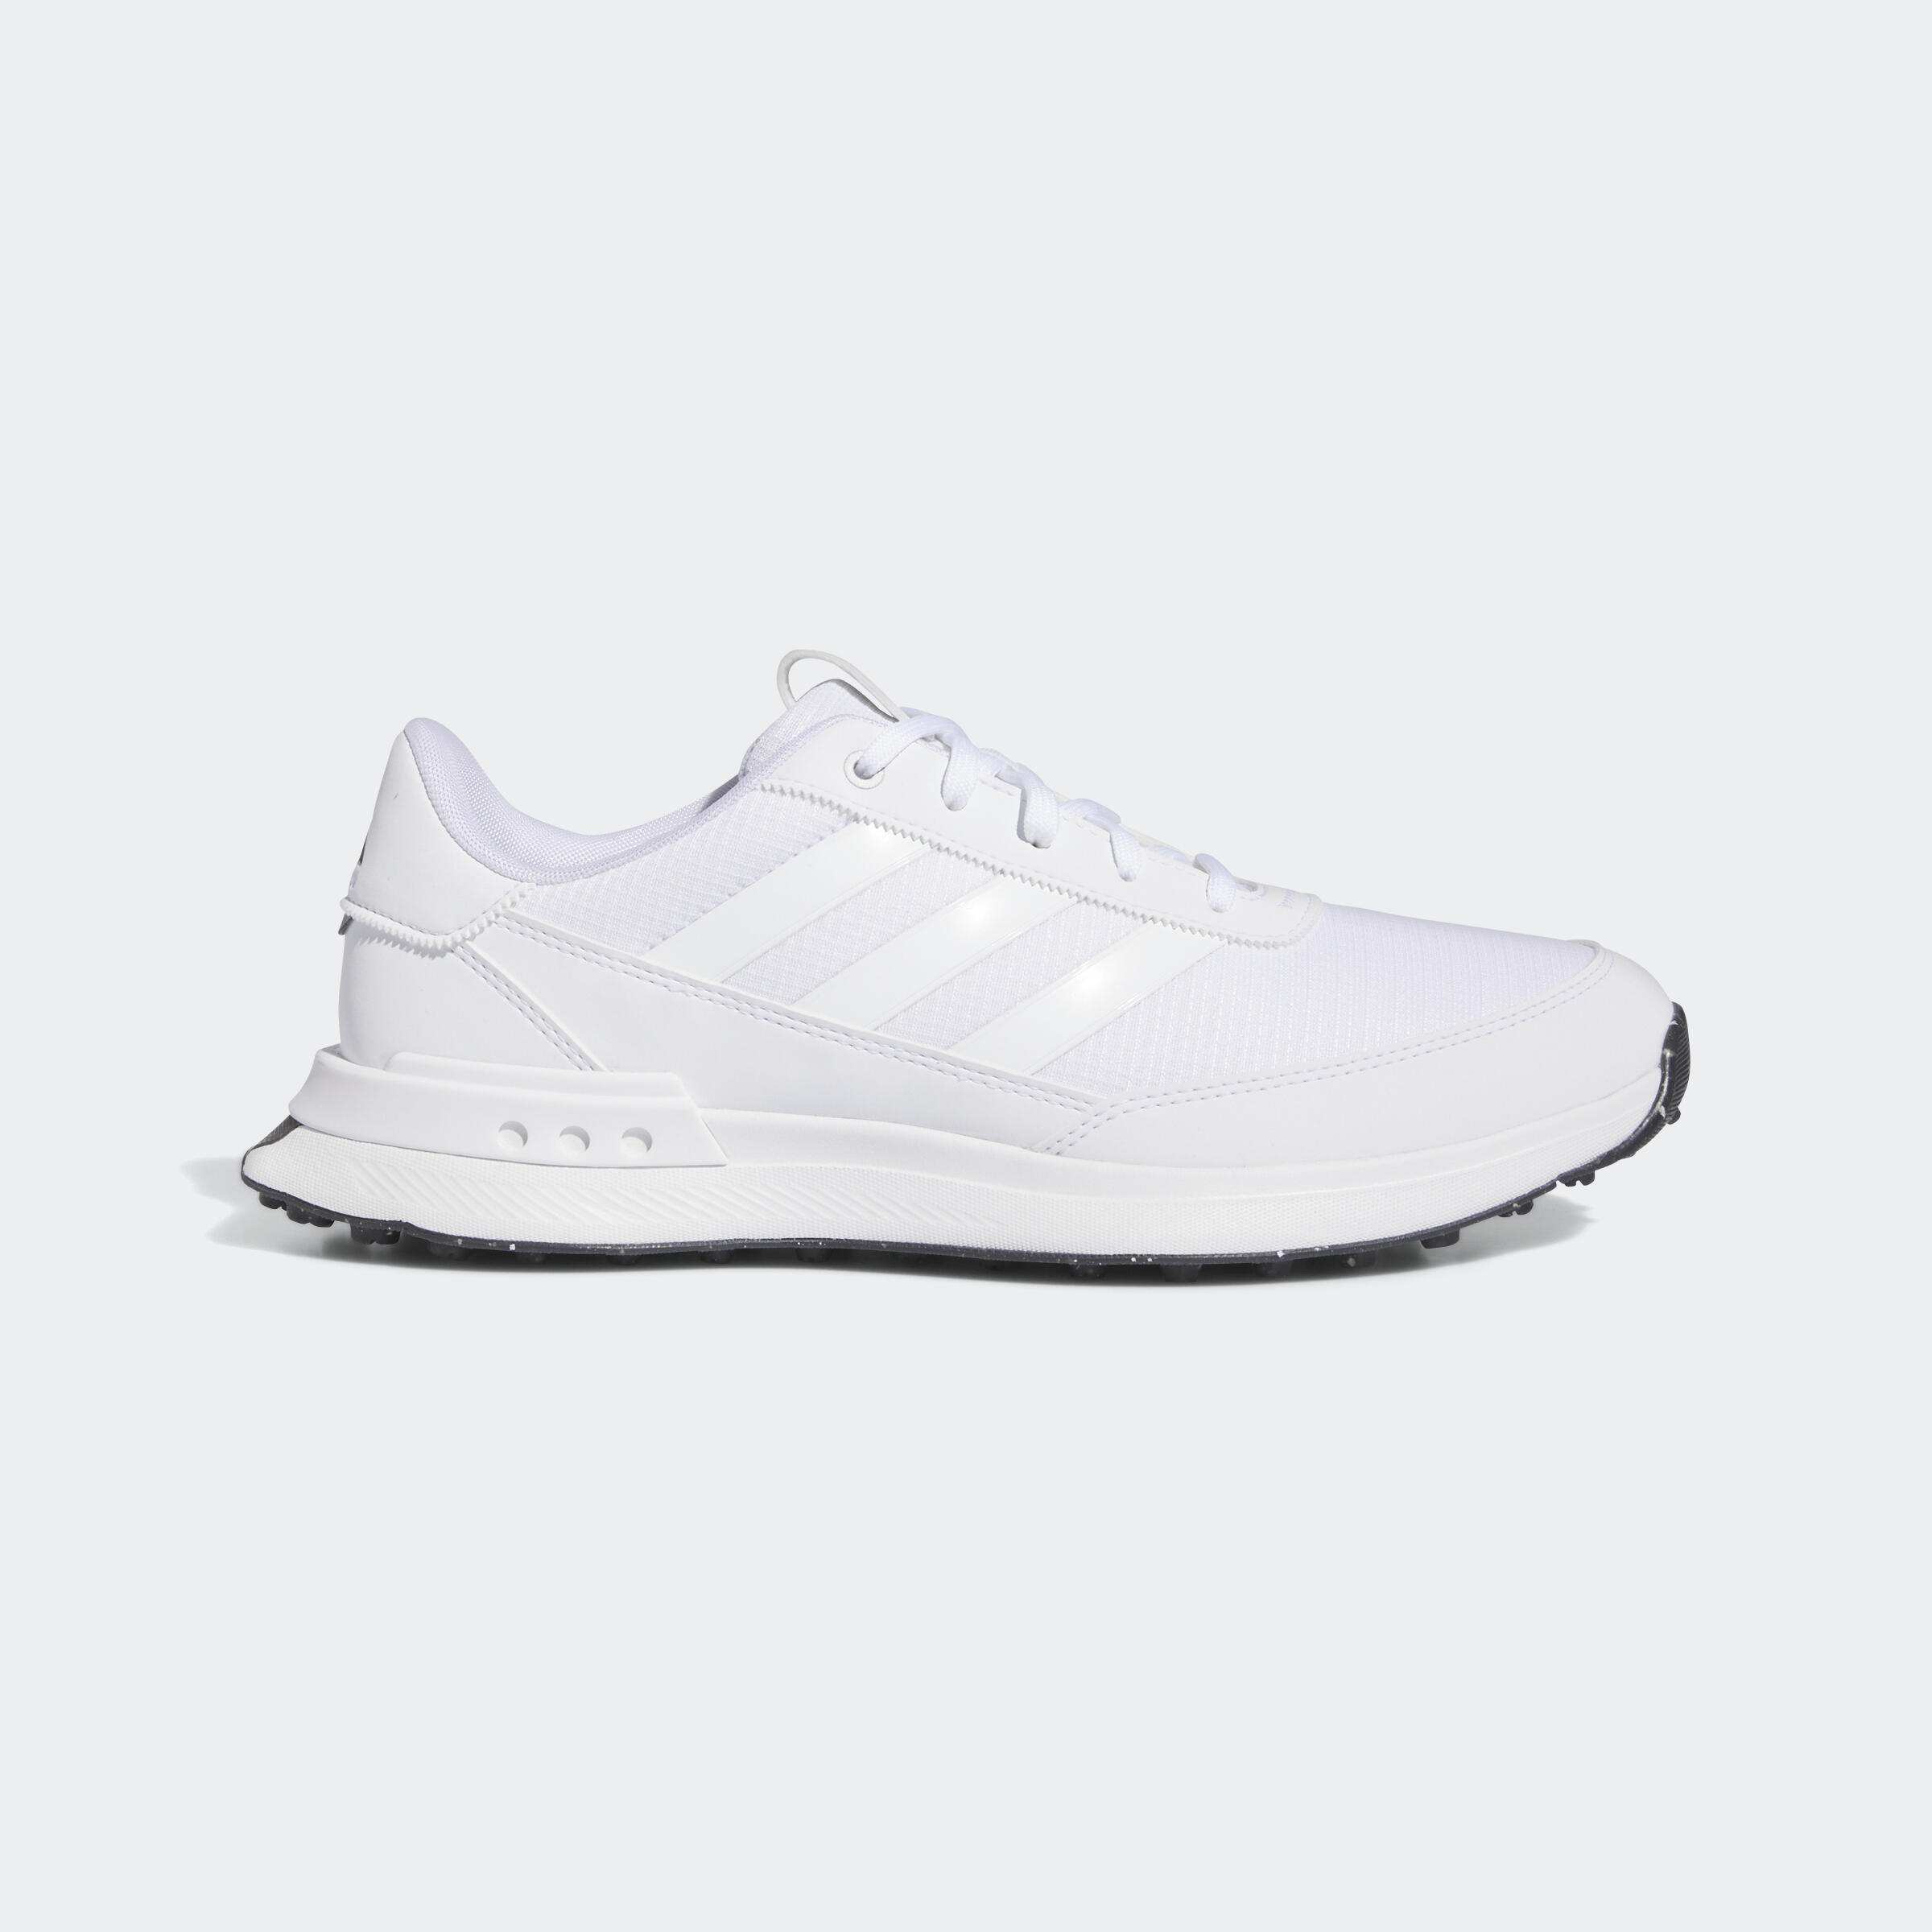 ADIDAS Men's golf breathable shoes ADIDAS S2G - white